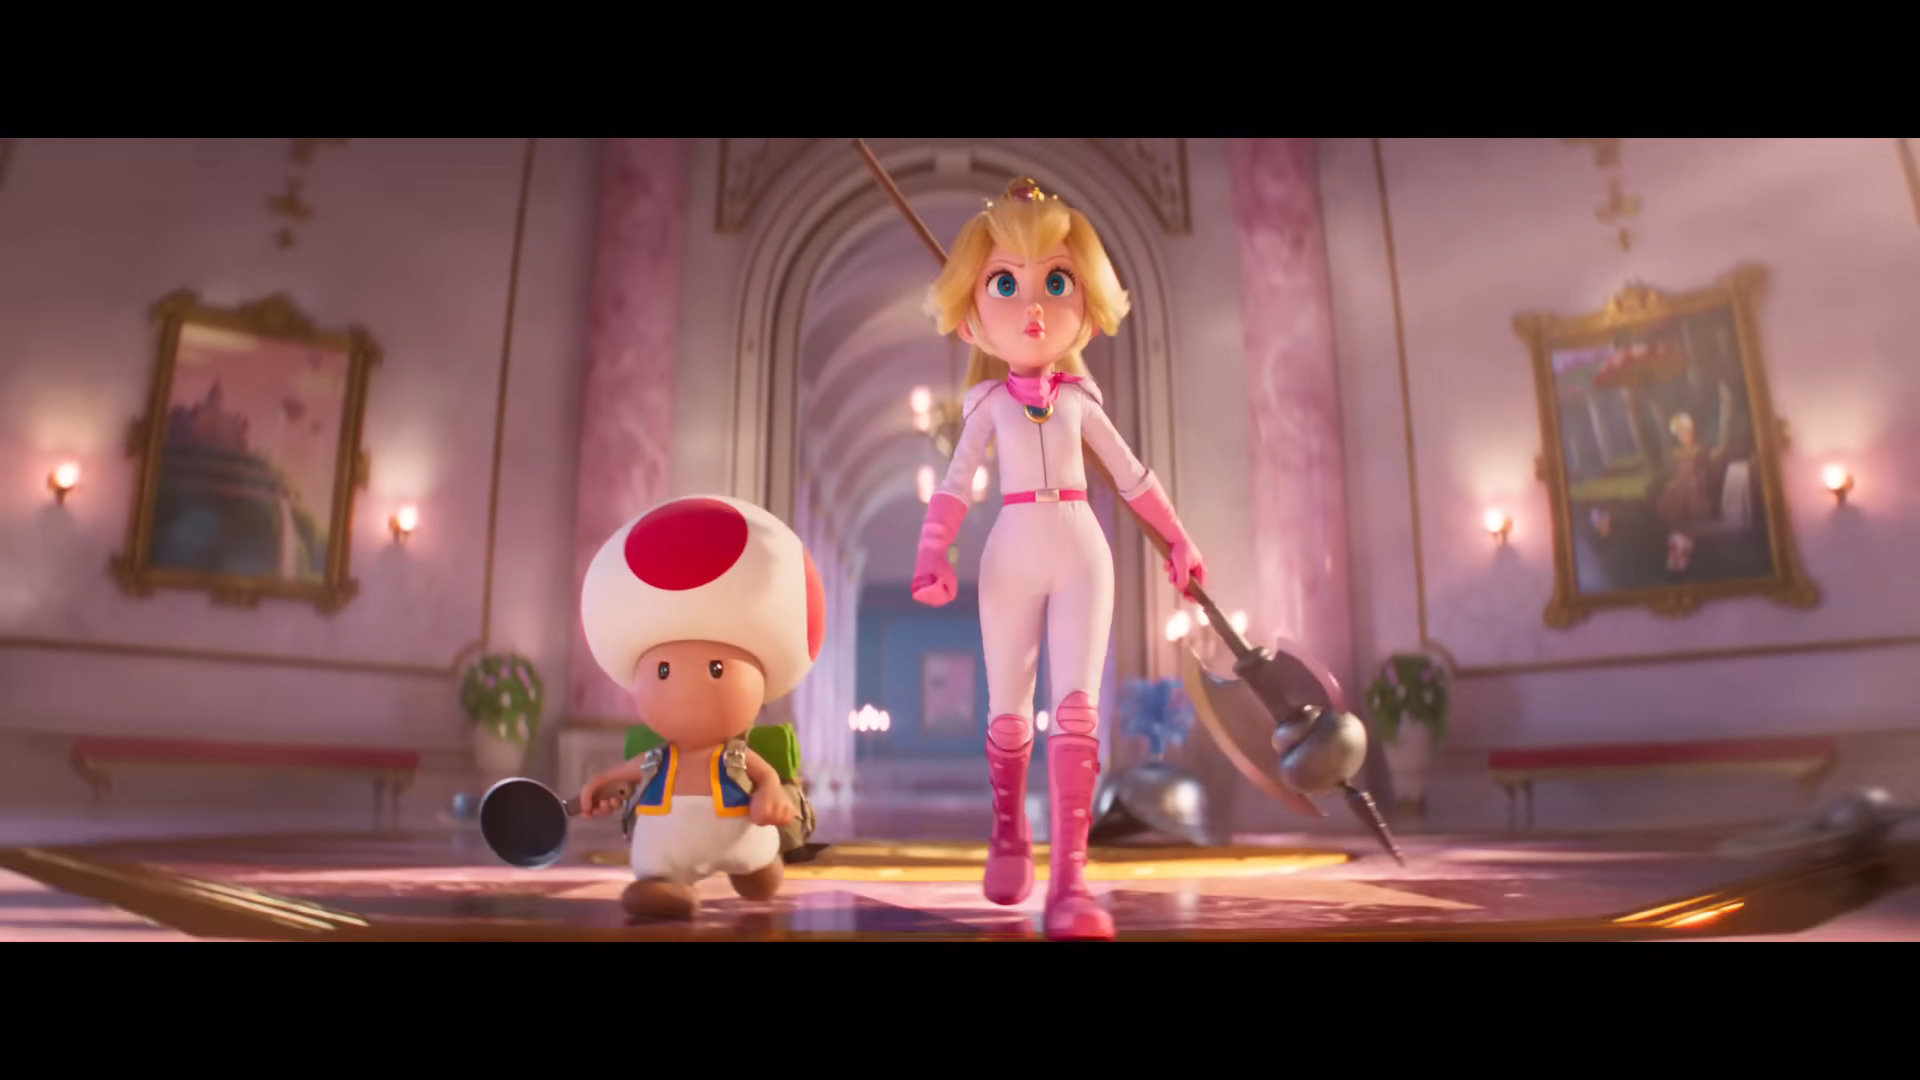 Toad (Keegan Michael-Key) and Princess Peach (Anya-Taylor Joy) suit up for battle in The Super Mario Bros. Movie (2023), Illumination Entertainment